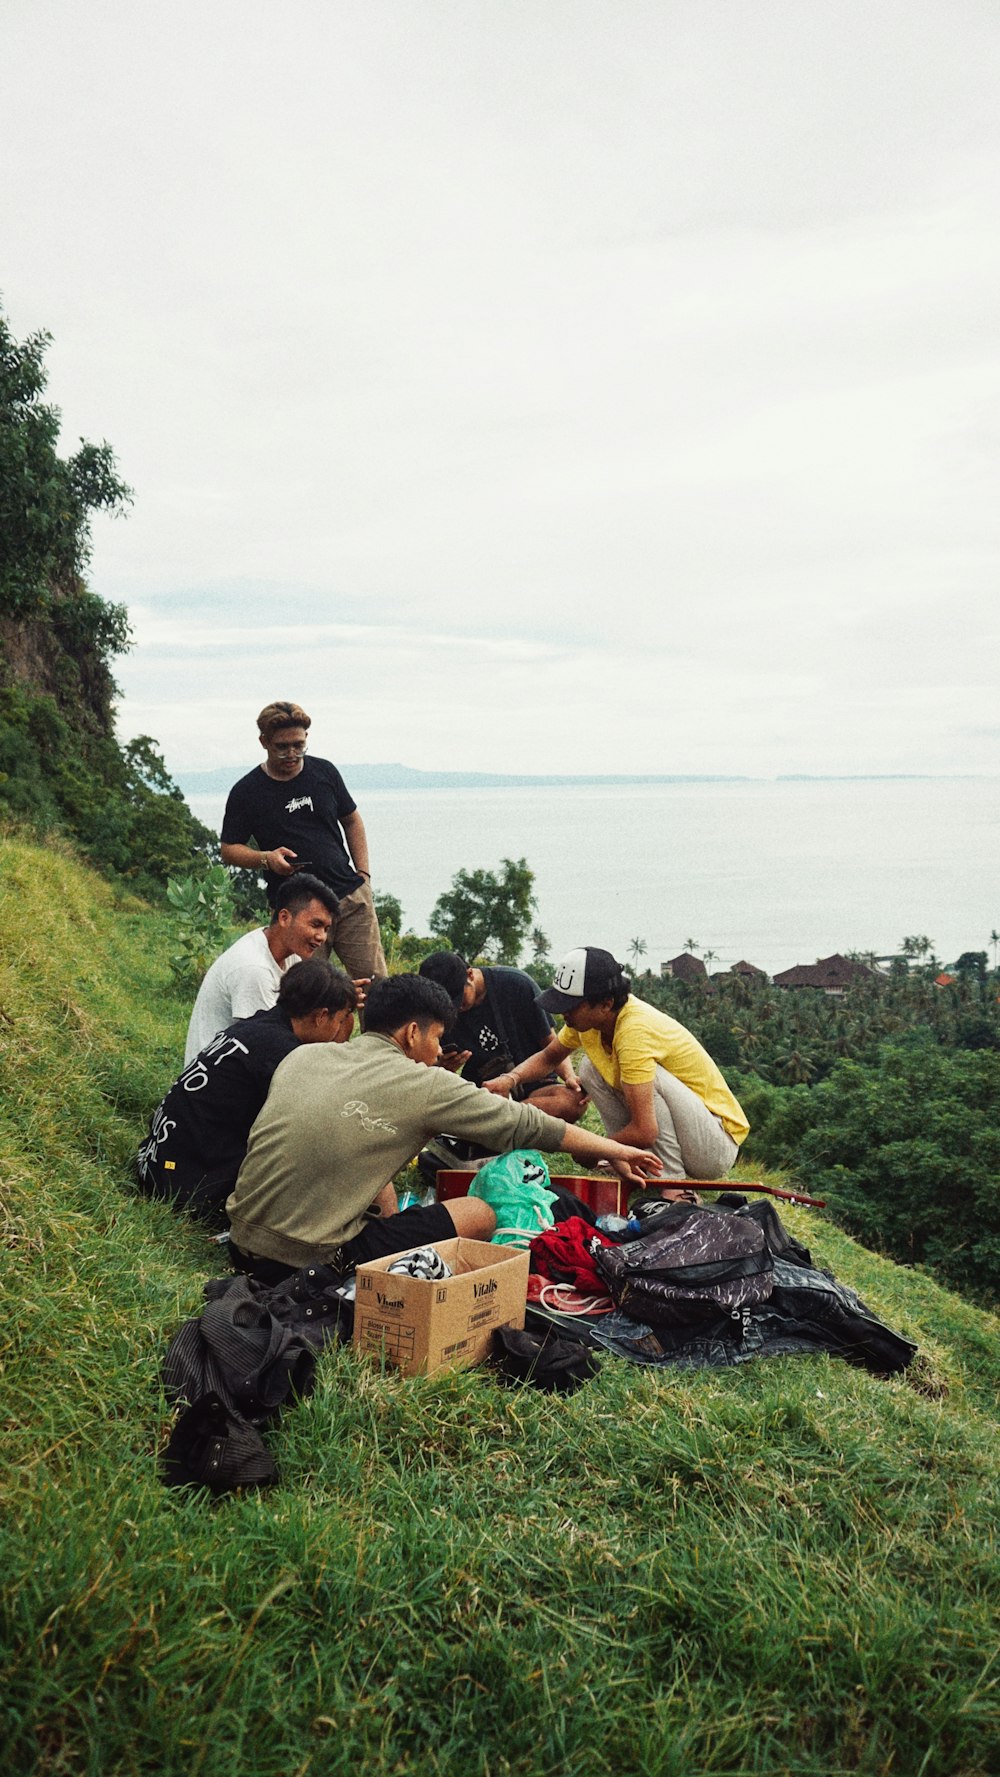 a group of people sitting on a hill with a body of water in the background